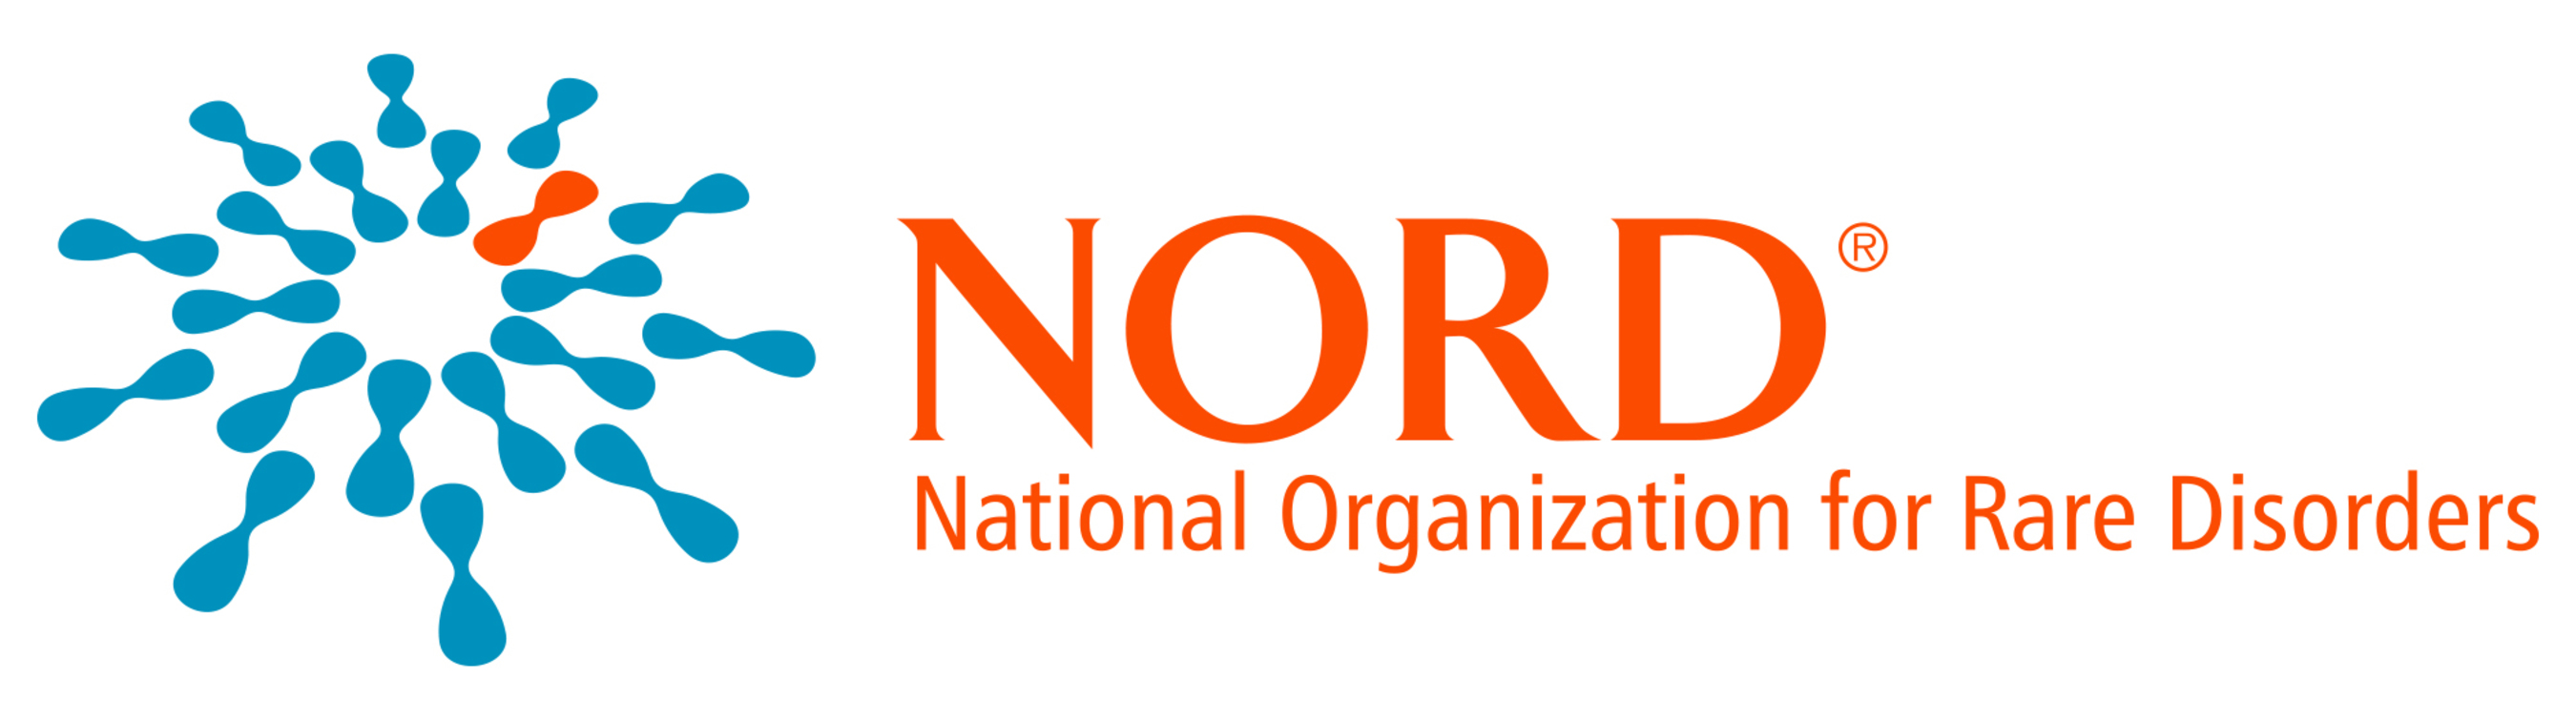 National Organization for Rare Disorders (NORD) logo. (PRNewsFoto/National Organization for Rare Disorders (NORD)) (PRNewsFoto/)